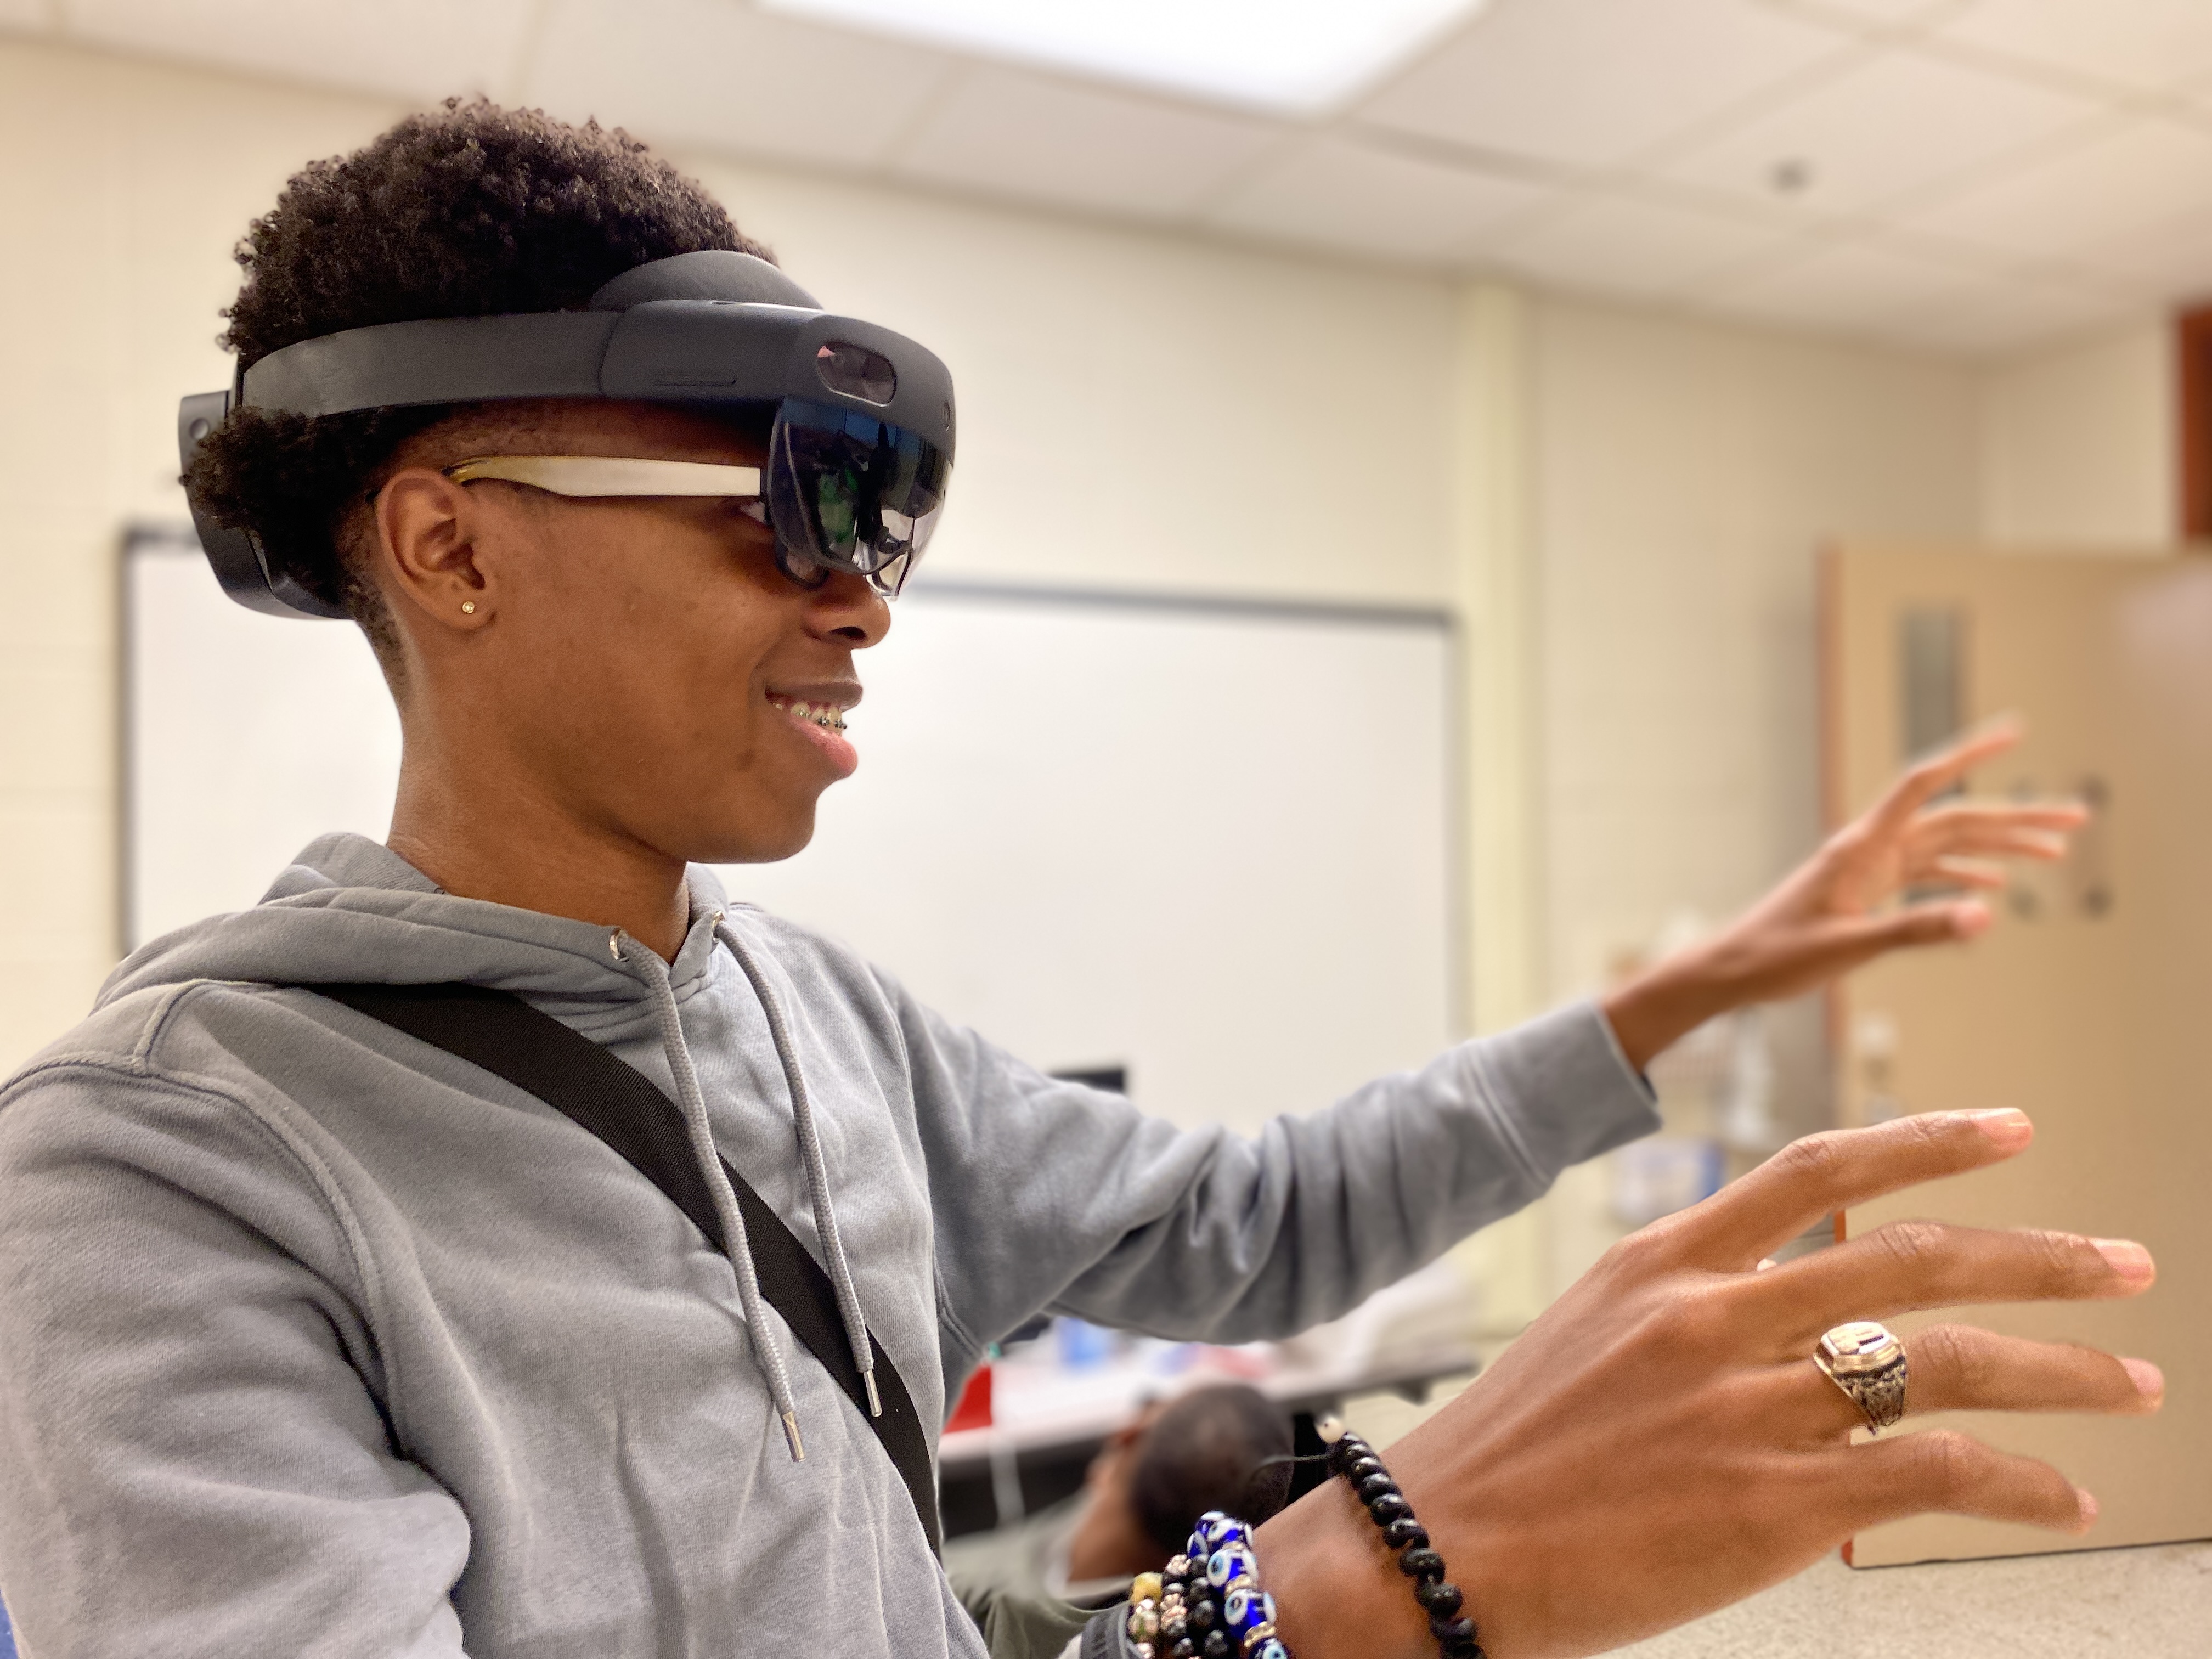 A student tries augmented reality while wearing a headset